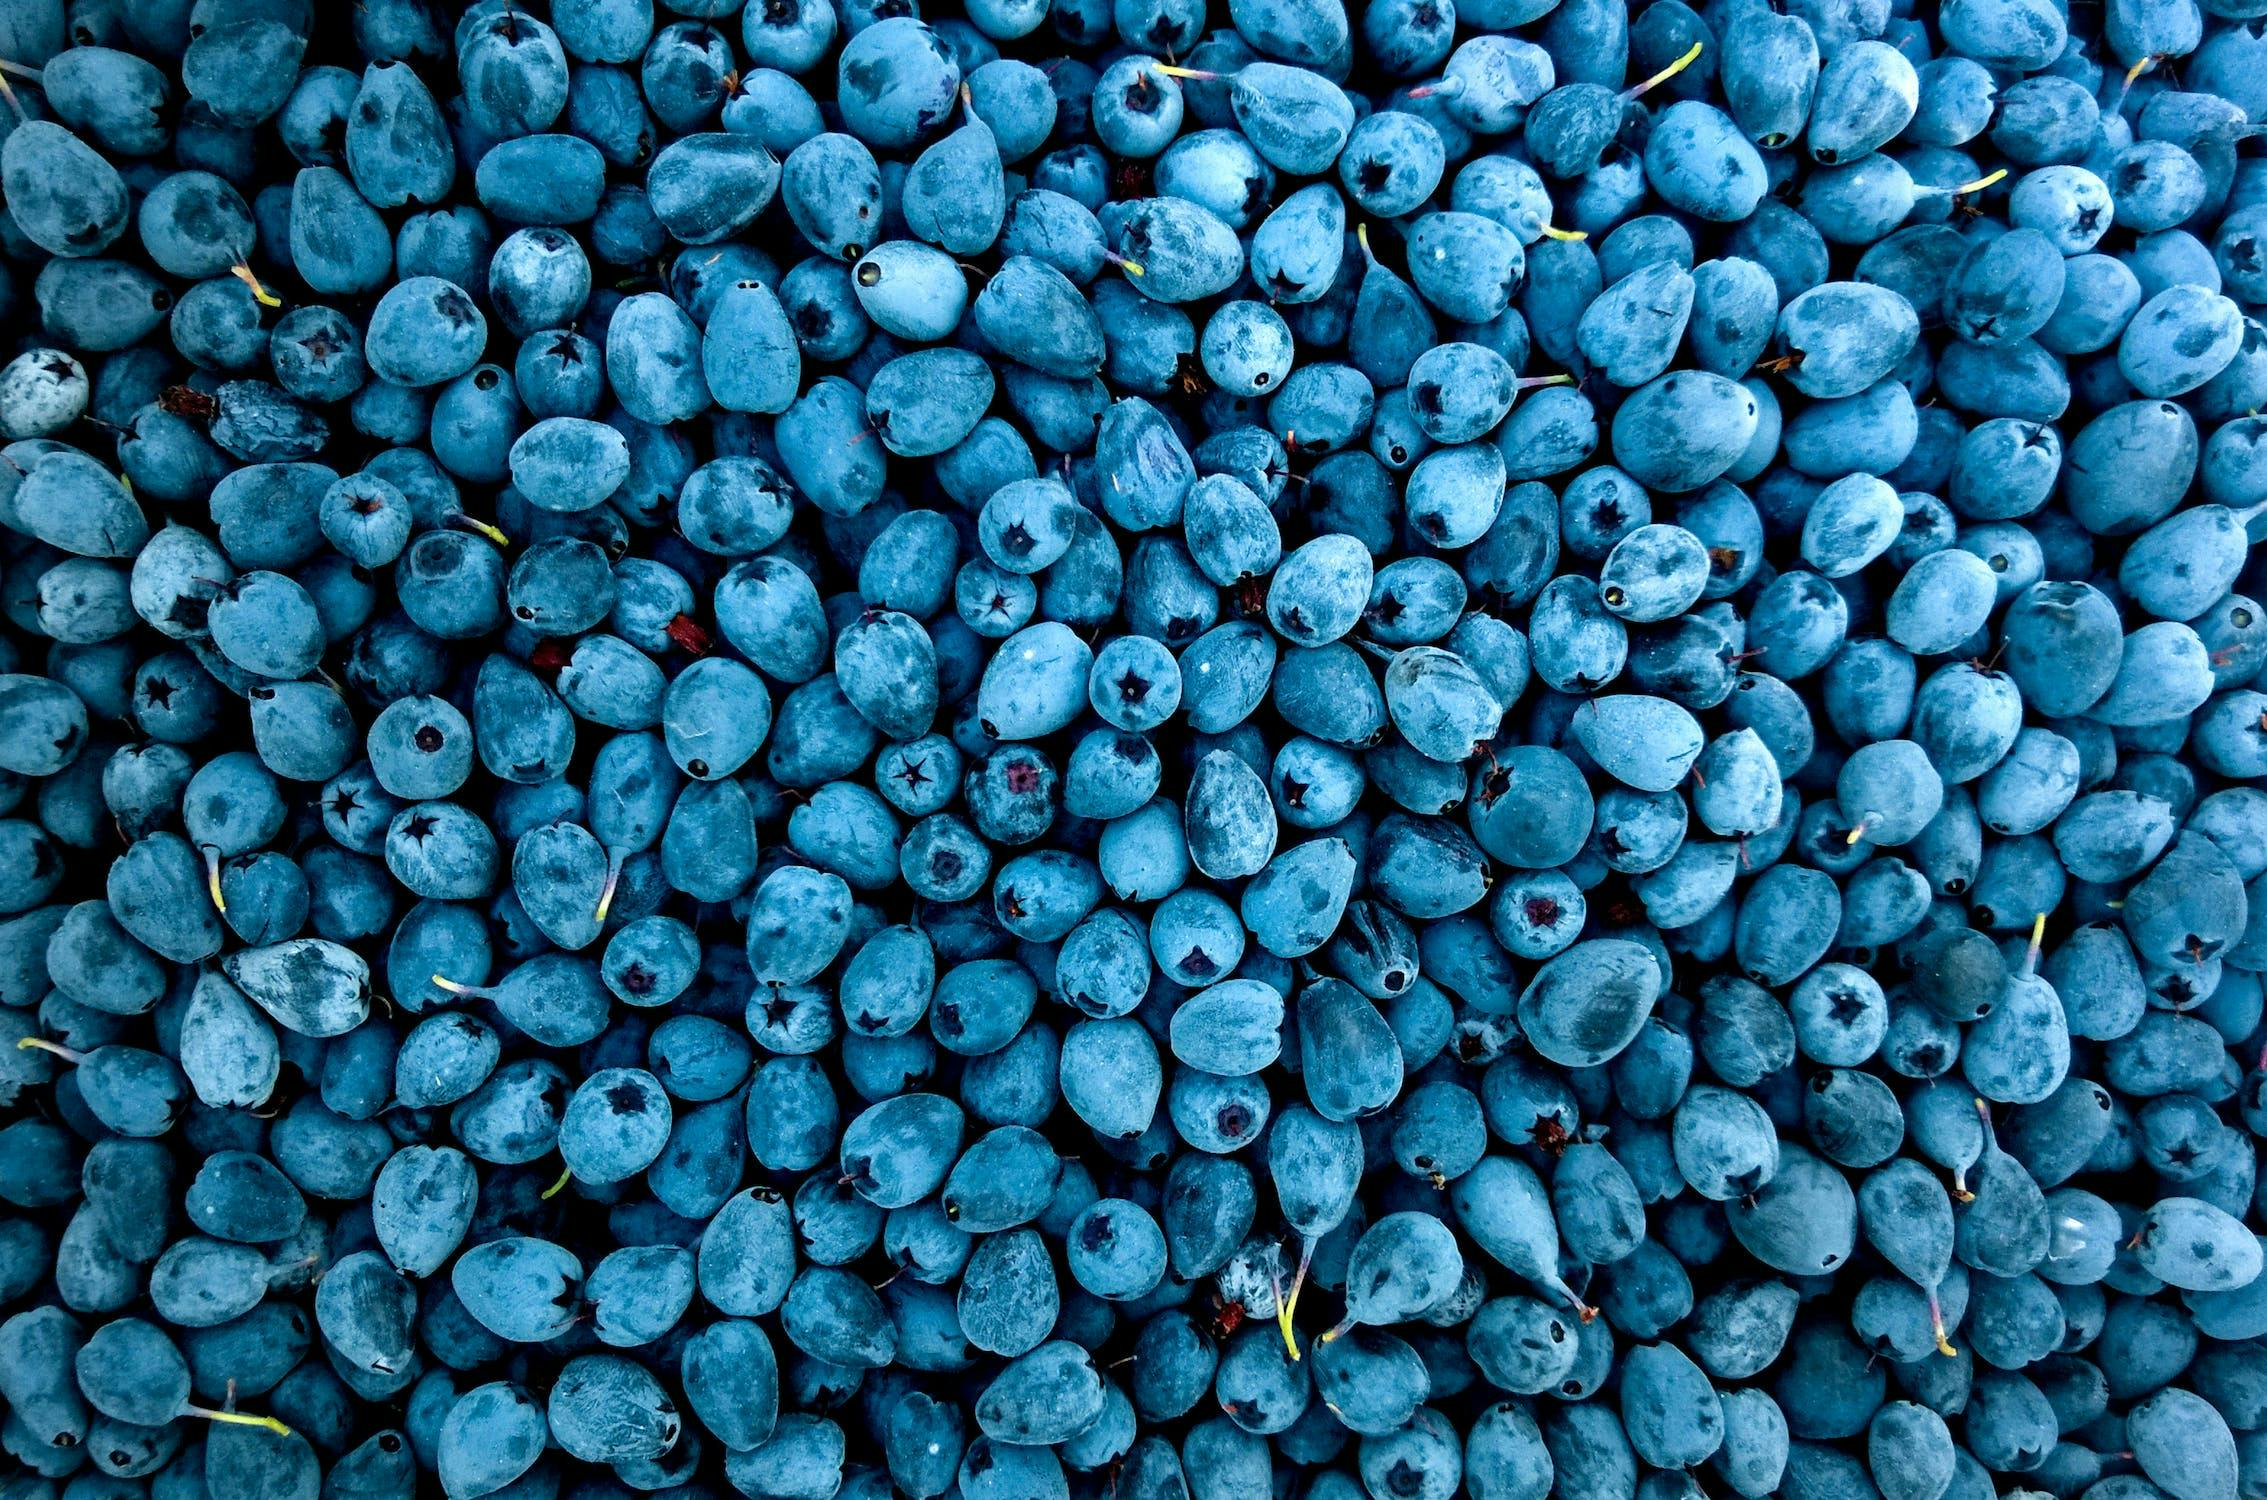 Can Dogs Eat Blueberries? The Nutritional Perks and Safety Tips